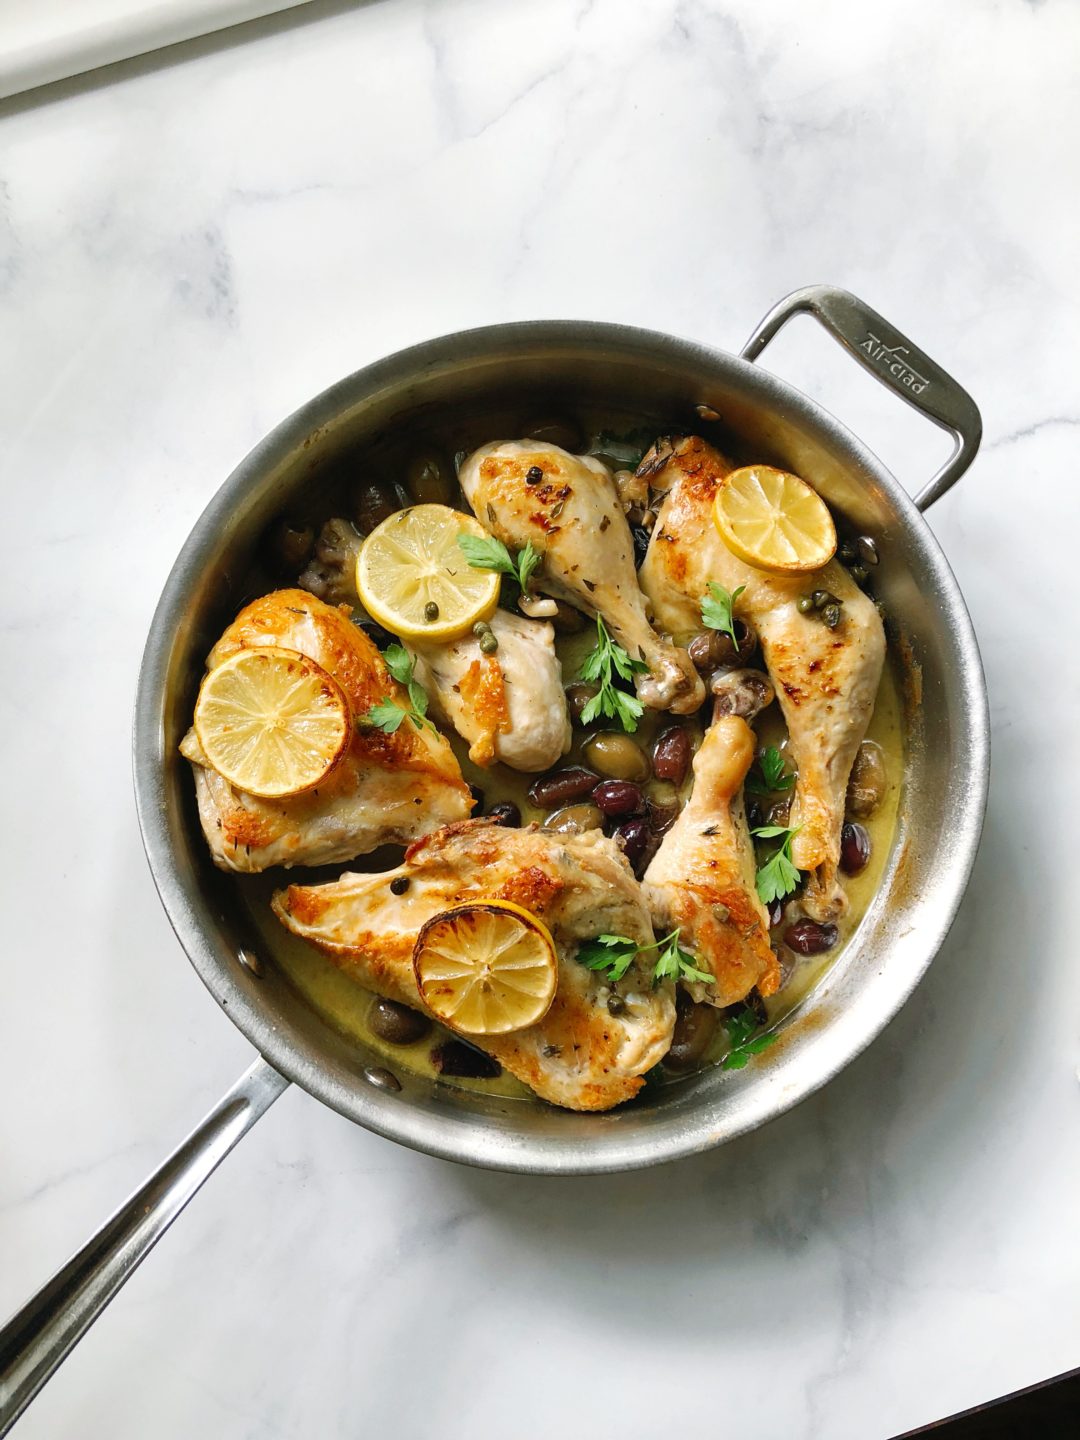 Lemon chicken with olives and capers